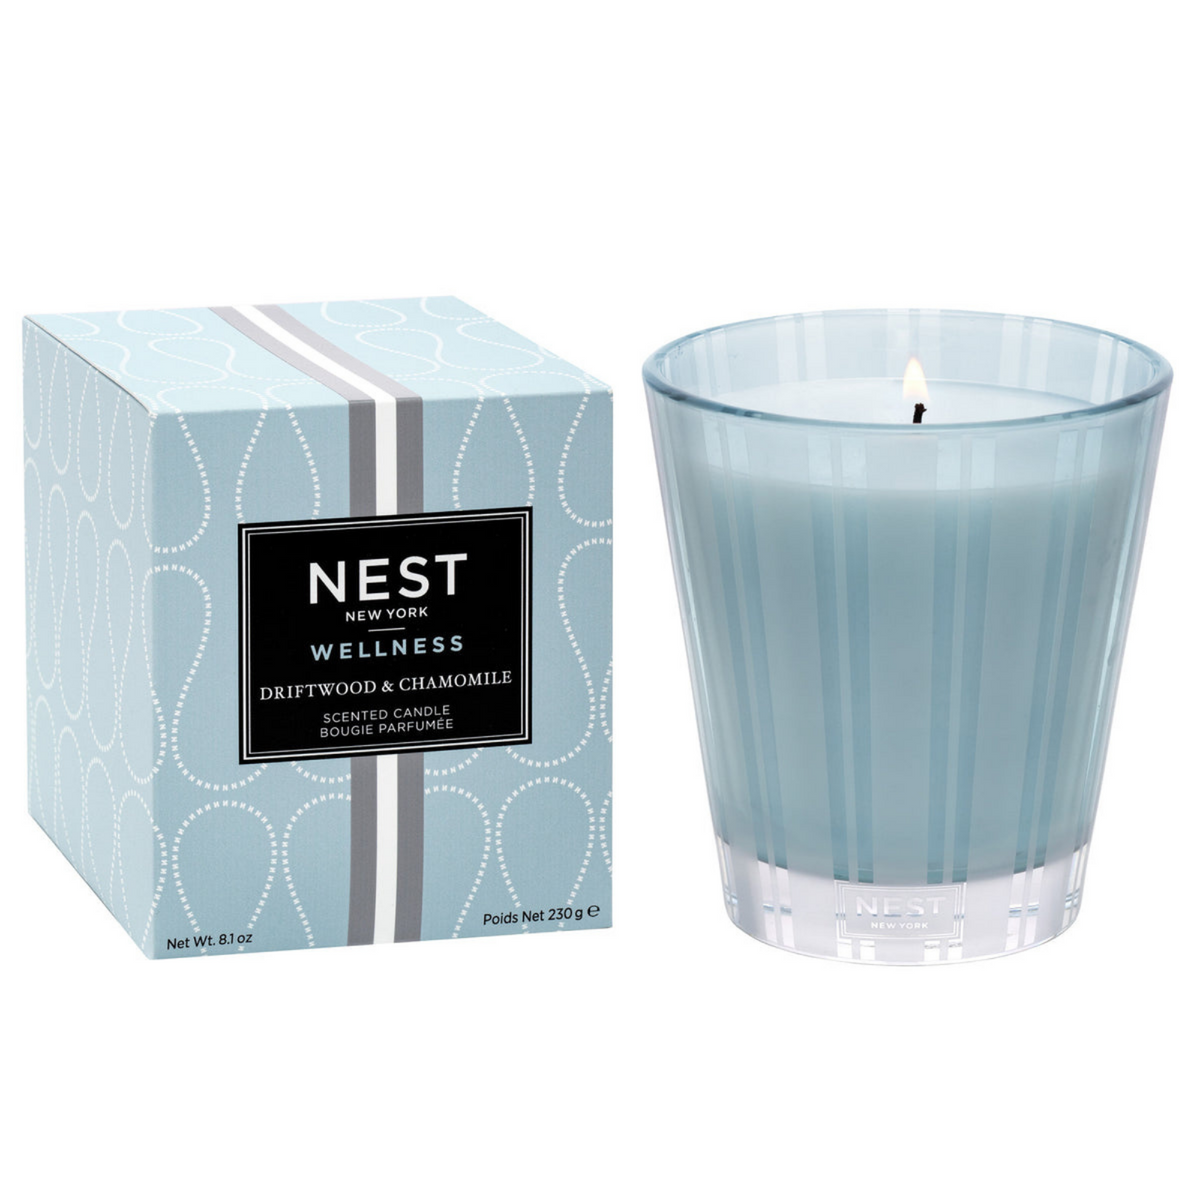 Primary Image of Driftwood & Chamomile Classic Candle